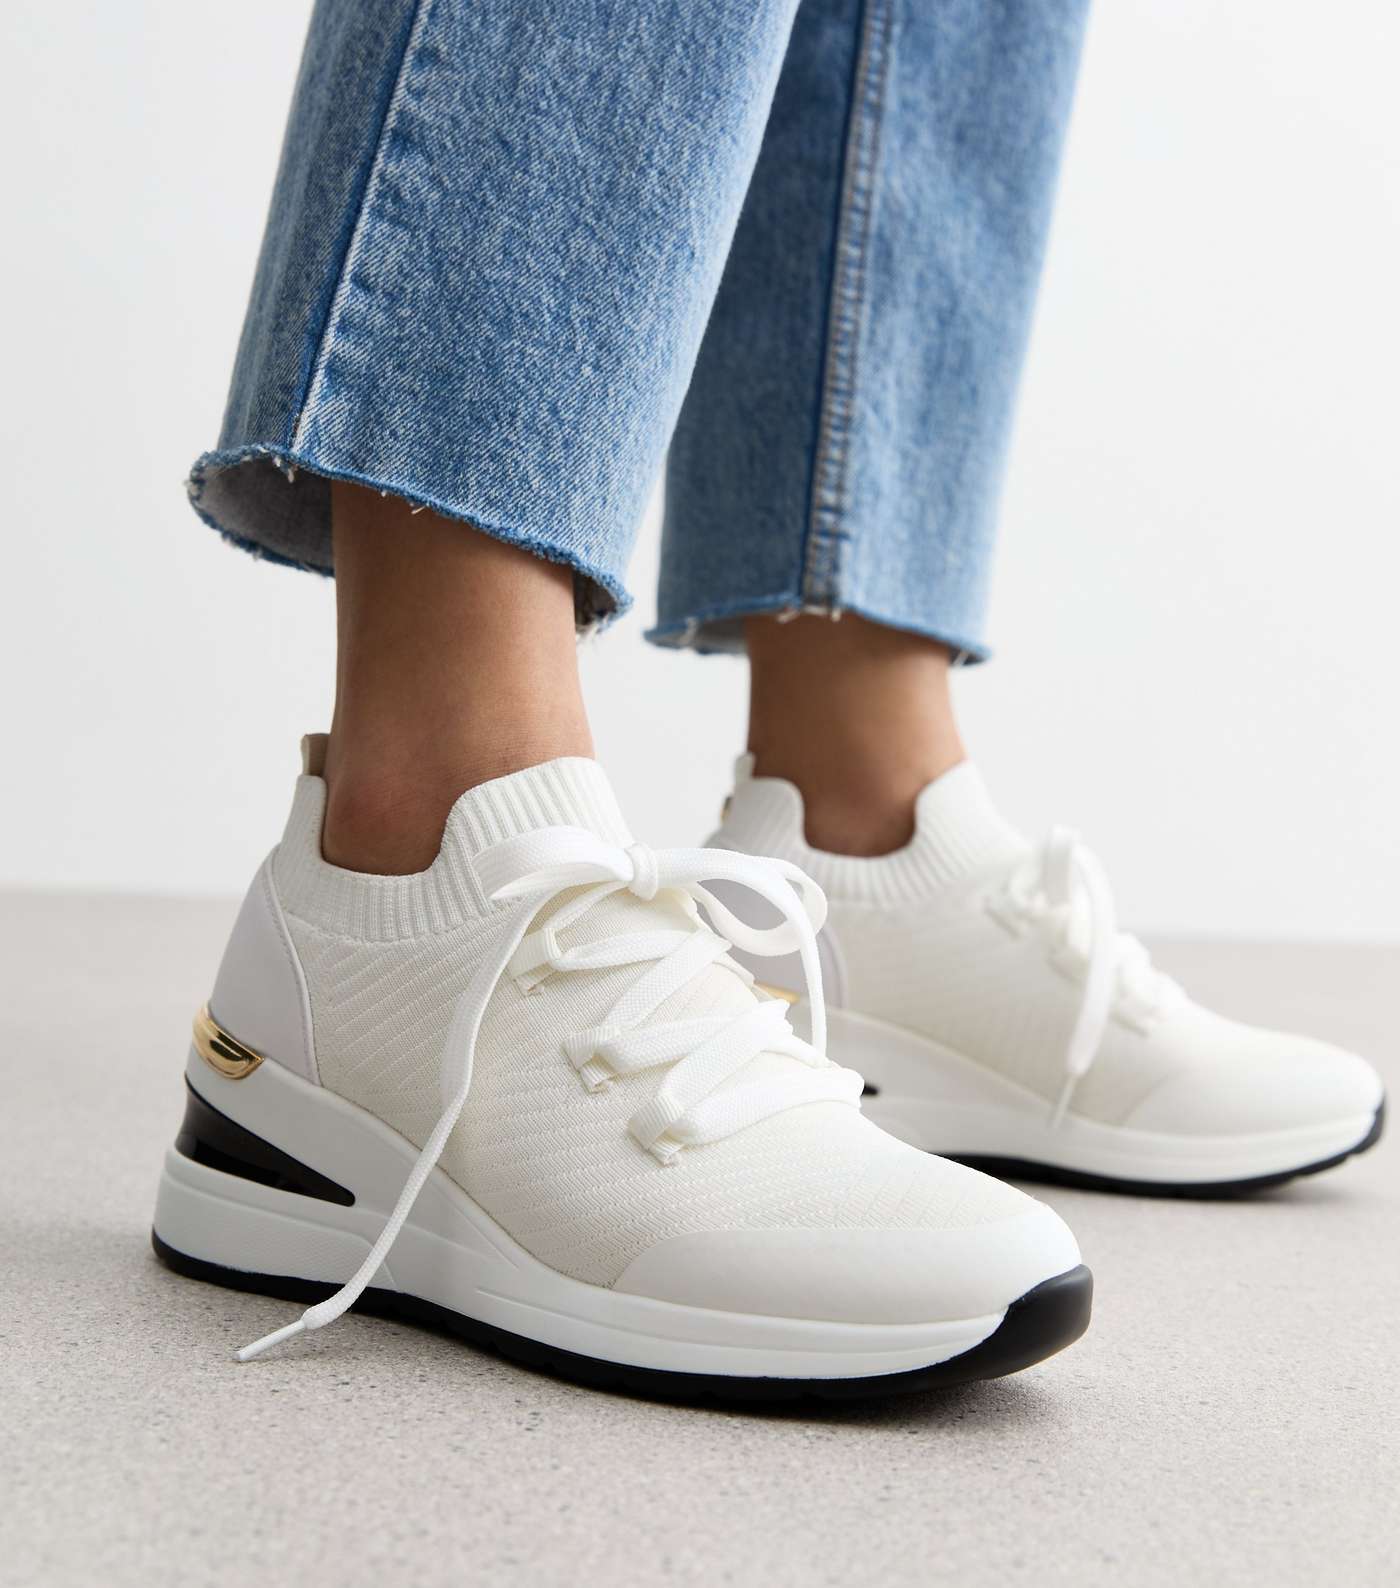 Wide Fit White Knit Wedge Heel Trainers Image 2